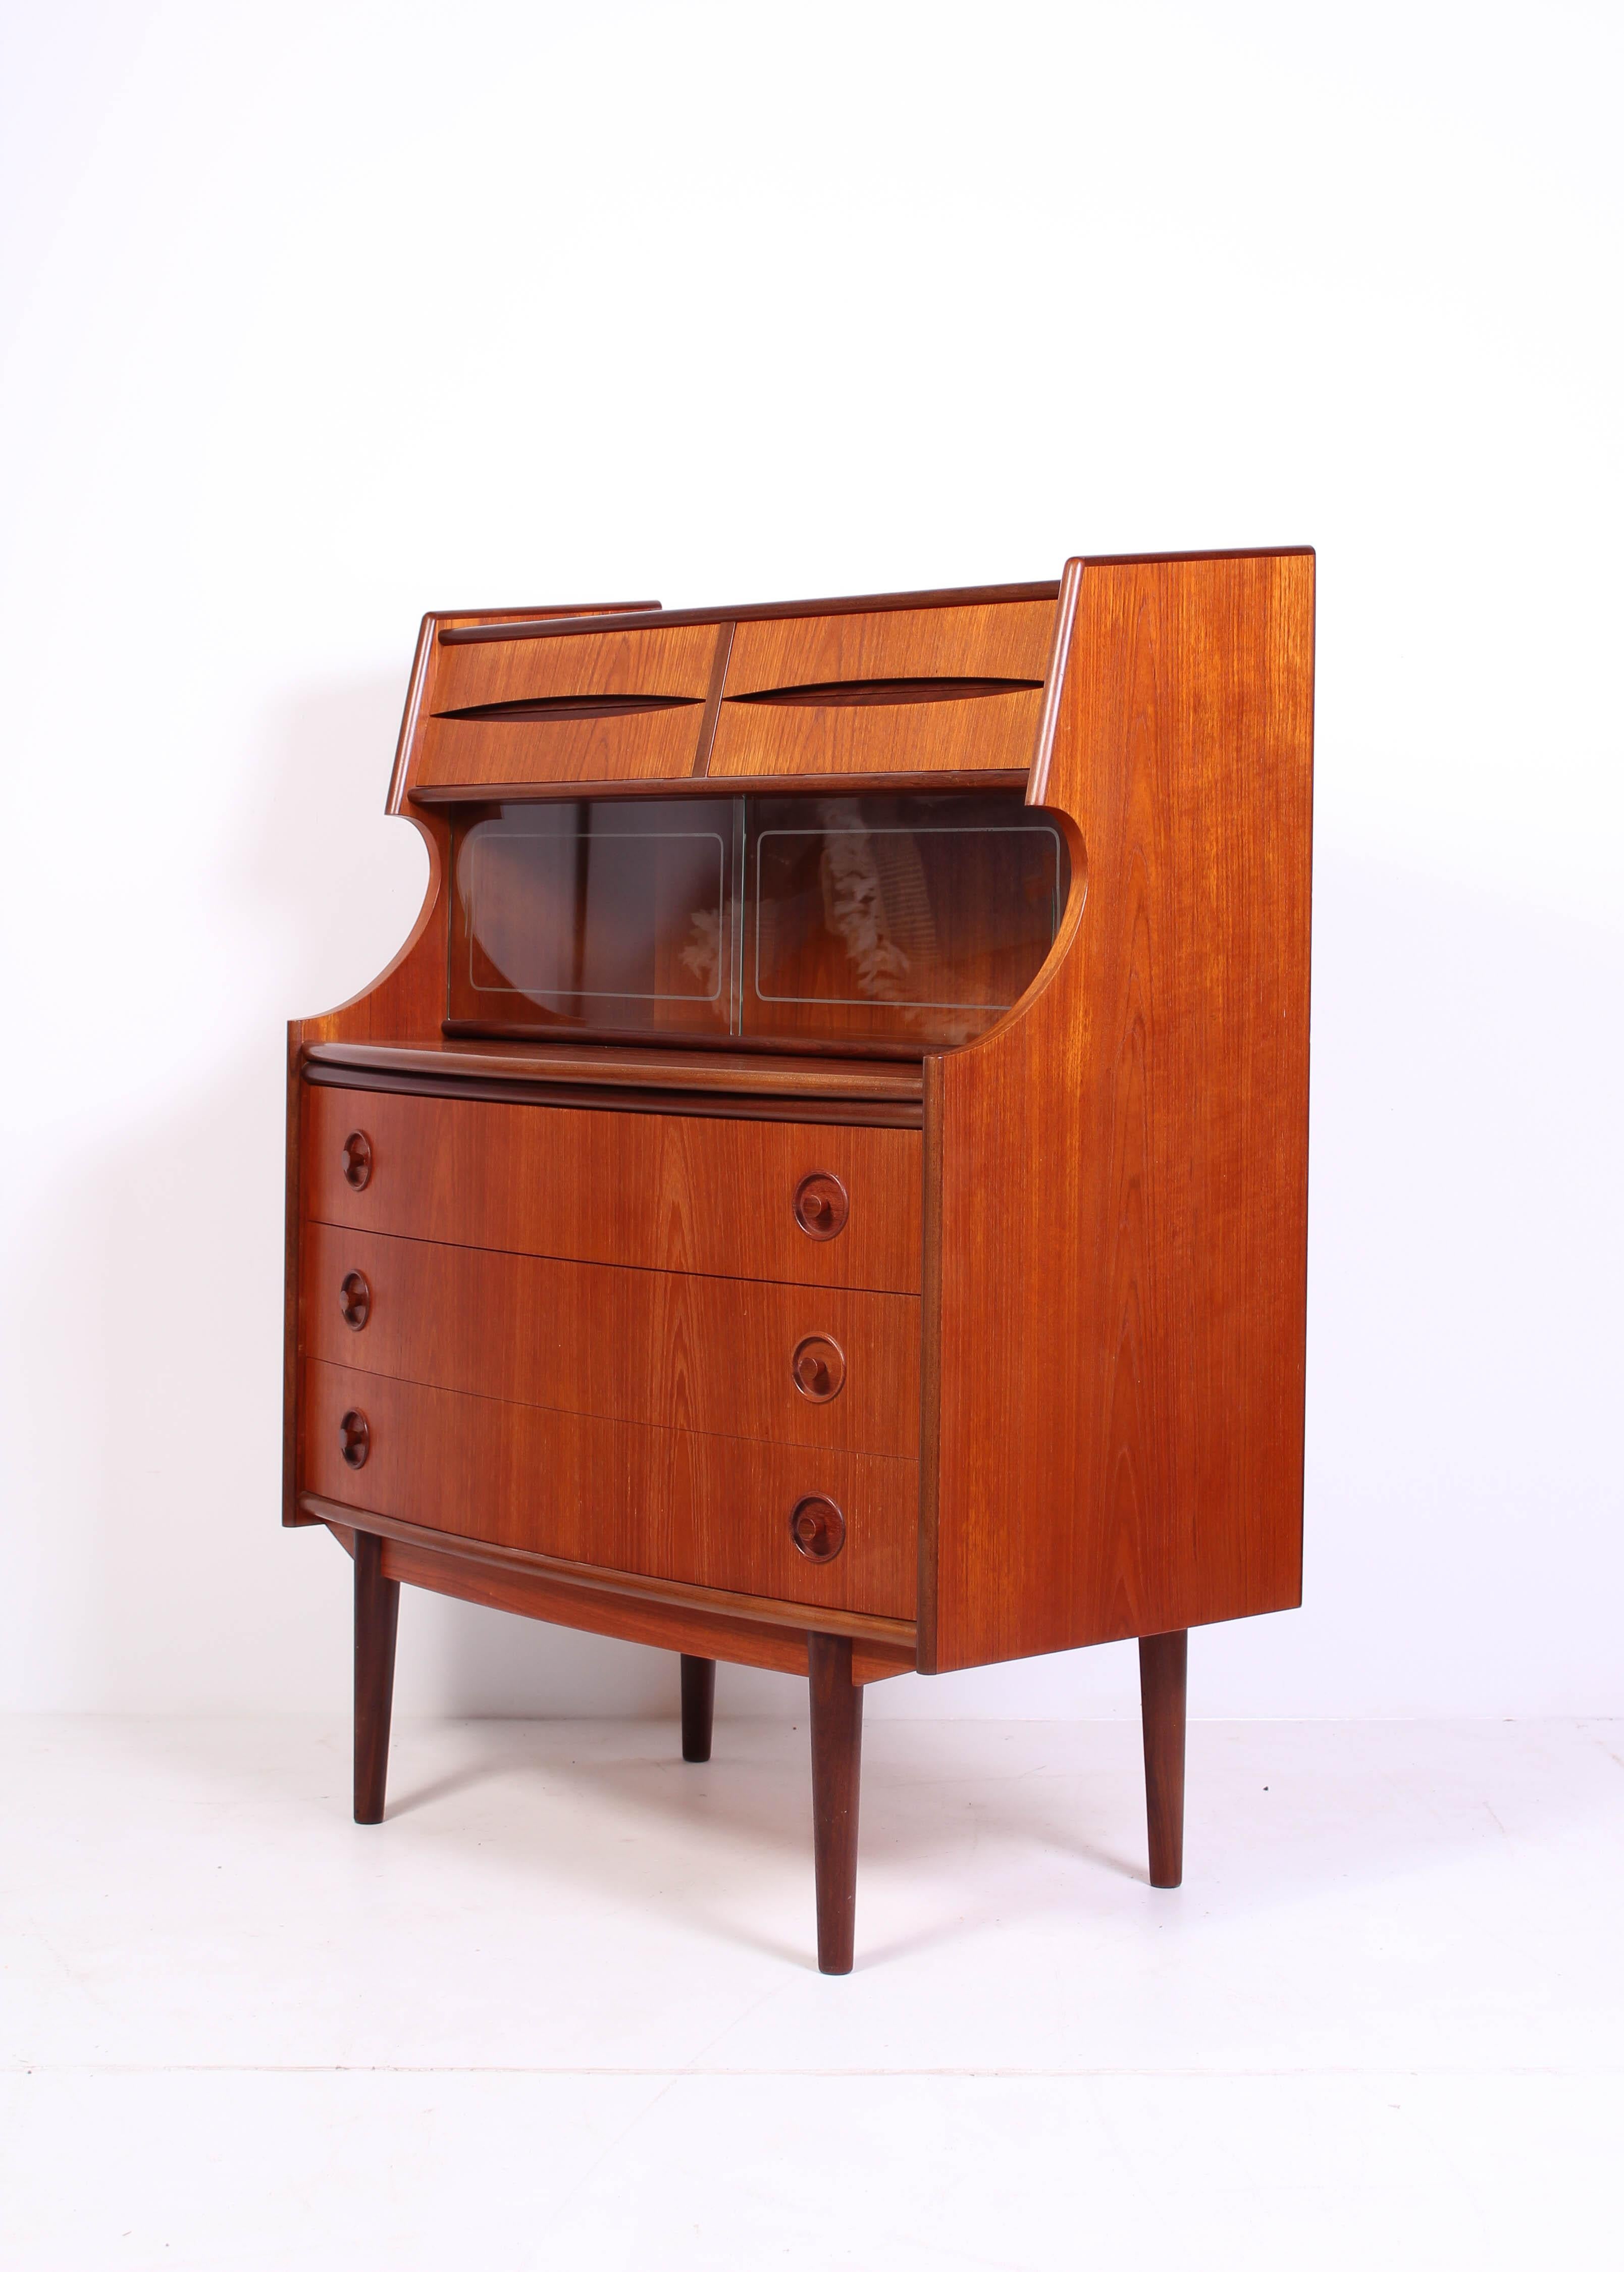 This midcentury Danish teak secretary features a curved front, sliding glass doors and beautiful handles on all drawers. It also features a pull-out leaf so it can be used as a desk. 

This piece is in very good vintage condition with minor signs